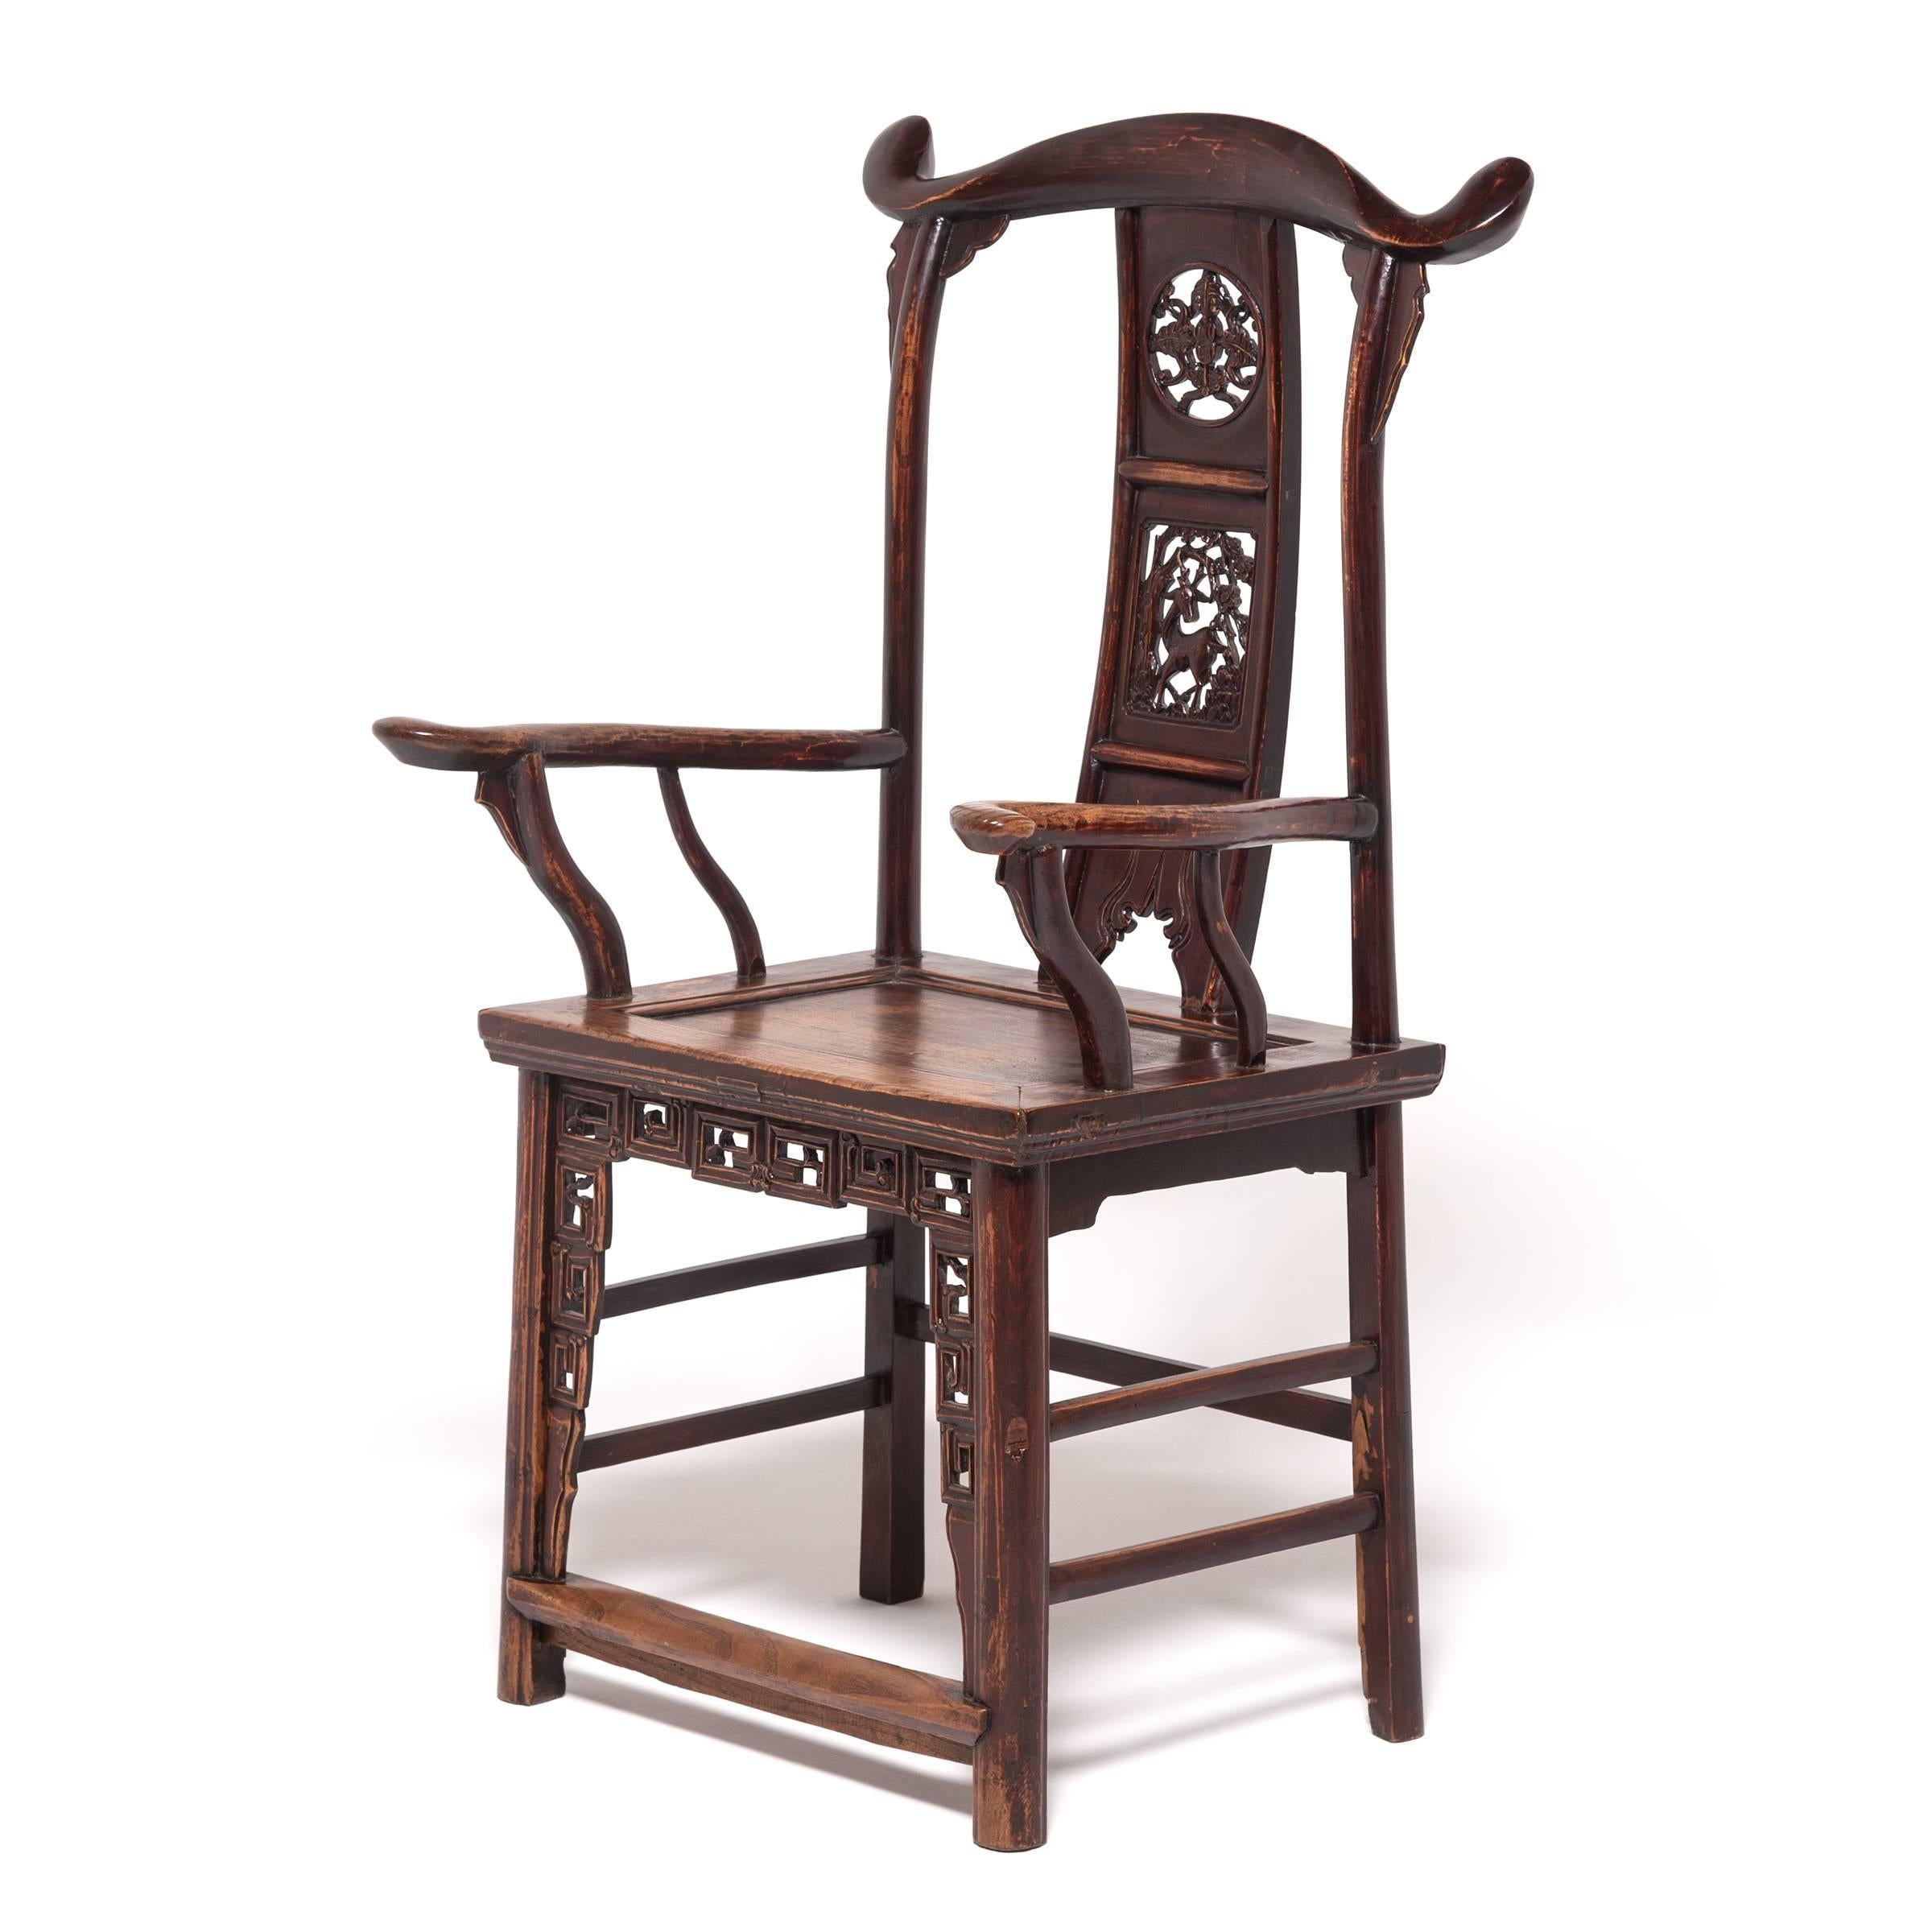 Qing Pair of Chinese Tall Back Chairs with Auspicious Deer Medallions, c. 1850